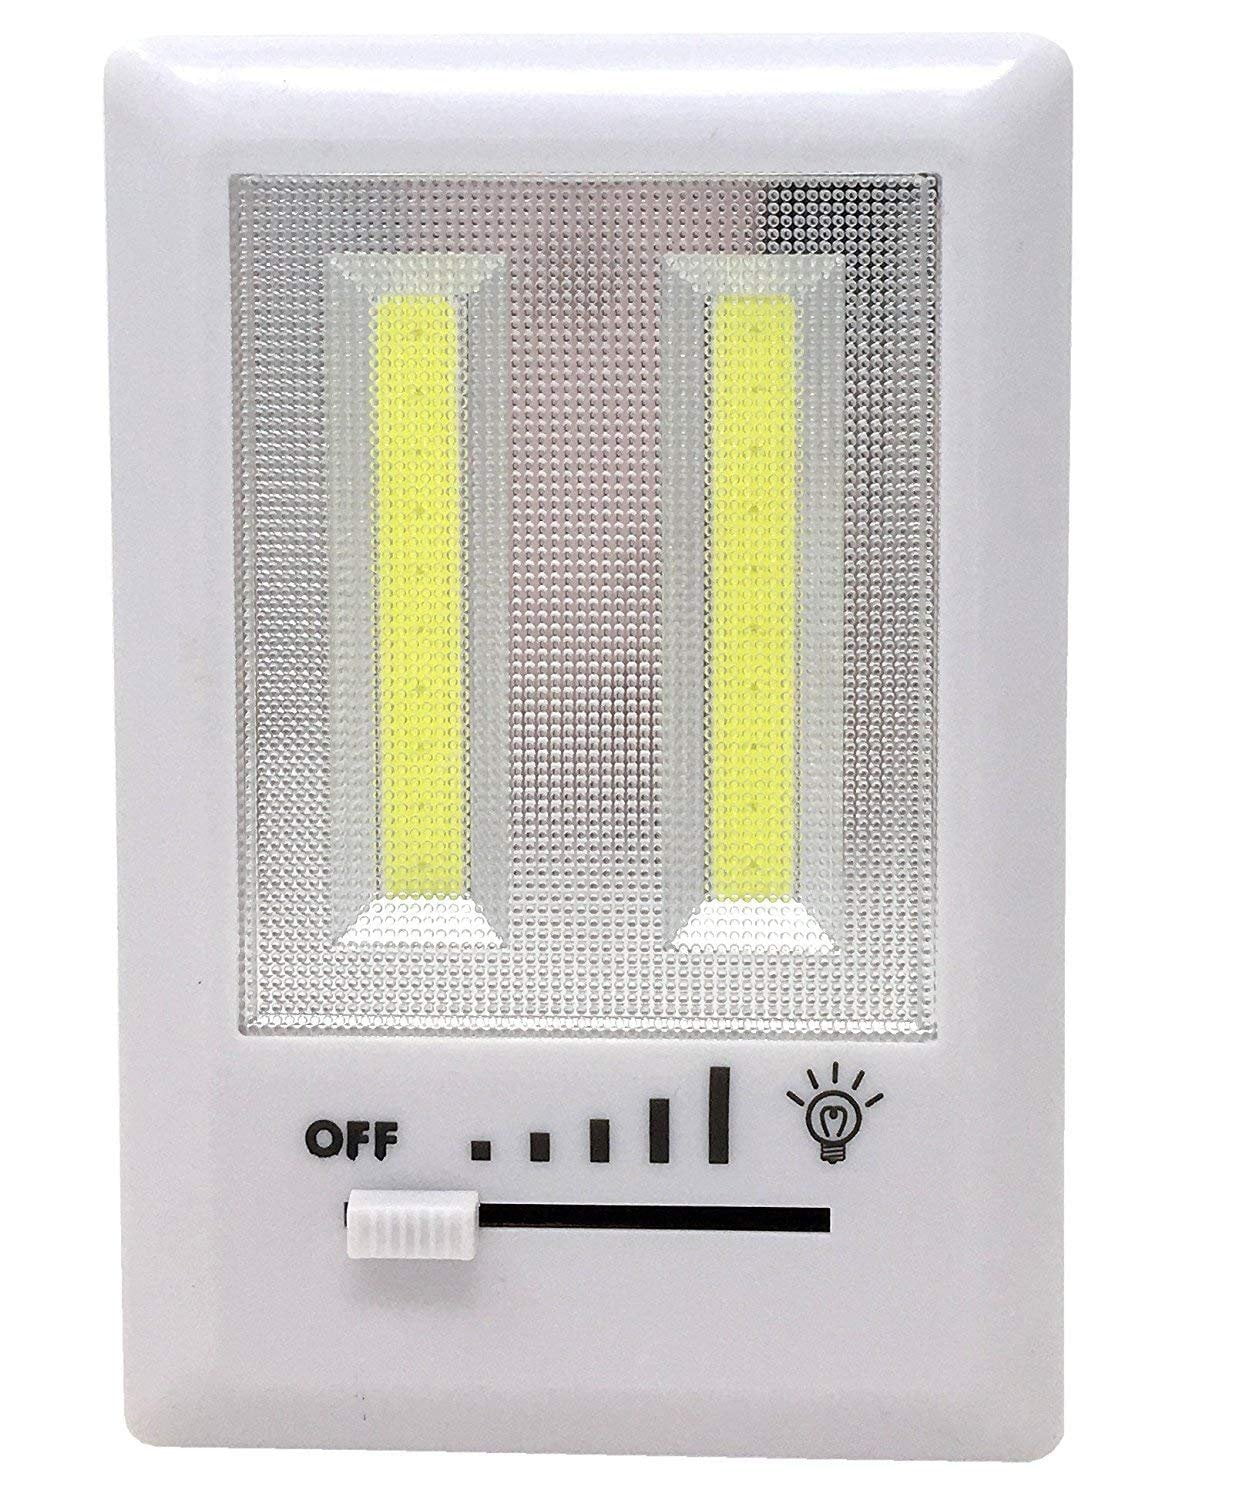 Bright LED Night Light Switch Wireless Cordless-BATTERIES INCLUDED 